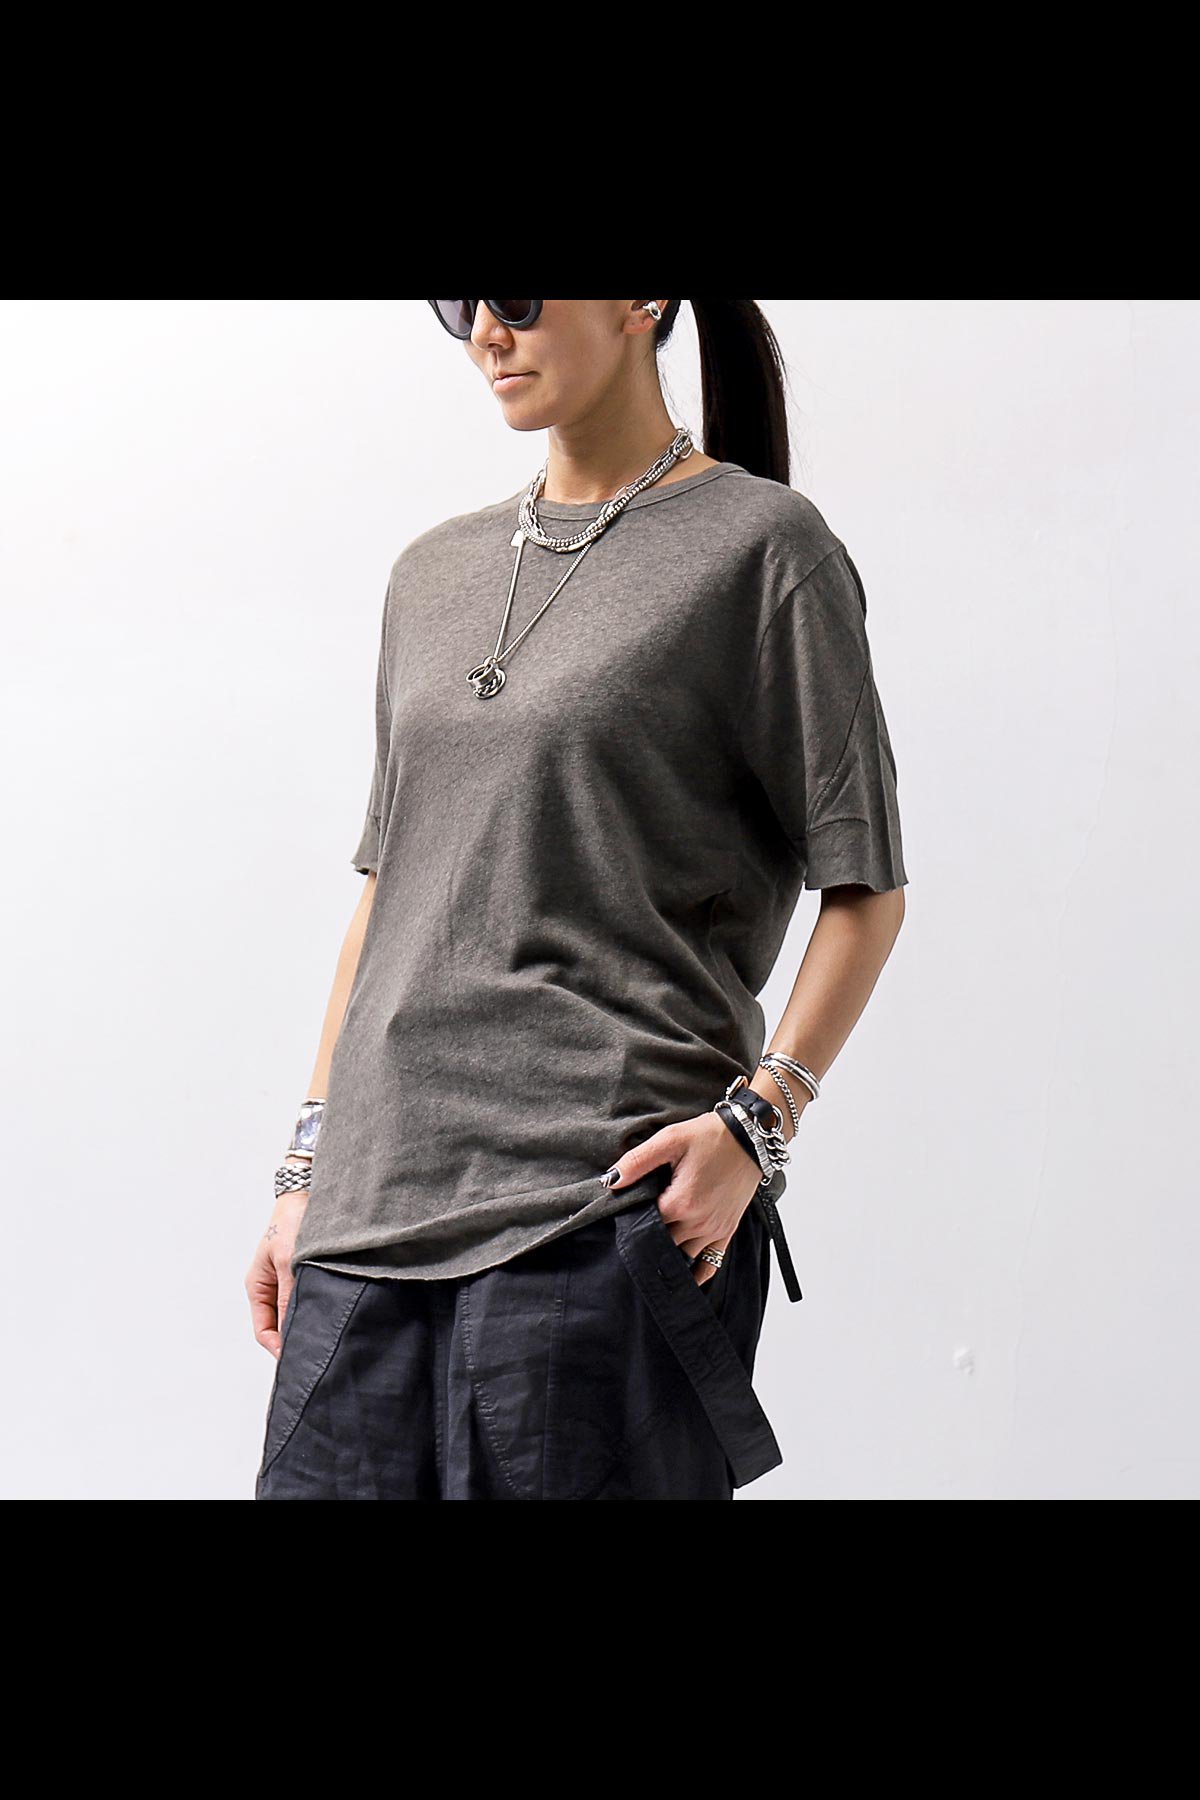 <img class='new_mark_img1' src='https://img.shop-pro.jp/img/new/icons8.gif' style='border:none;display:inline;margin:0px;padding:0px;width:auto;' />UNISEX COTTON LINEN T-SHIRT MTS779_IVY GREEN T10